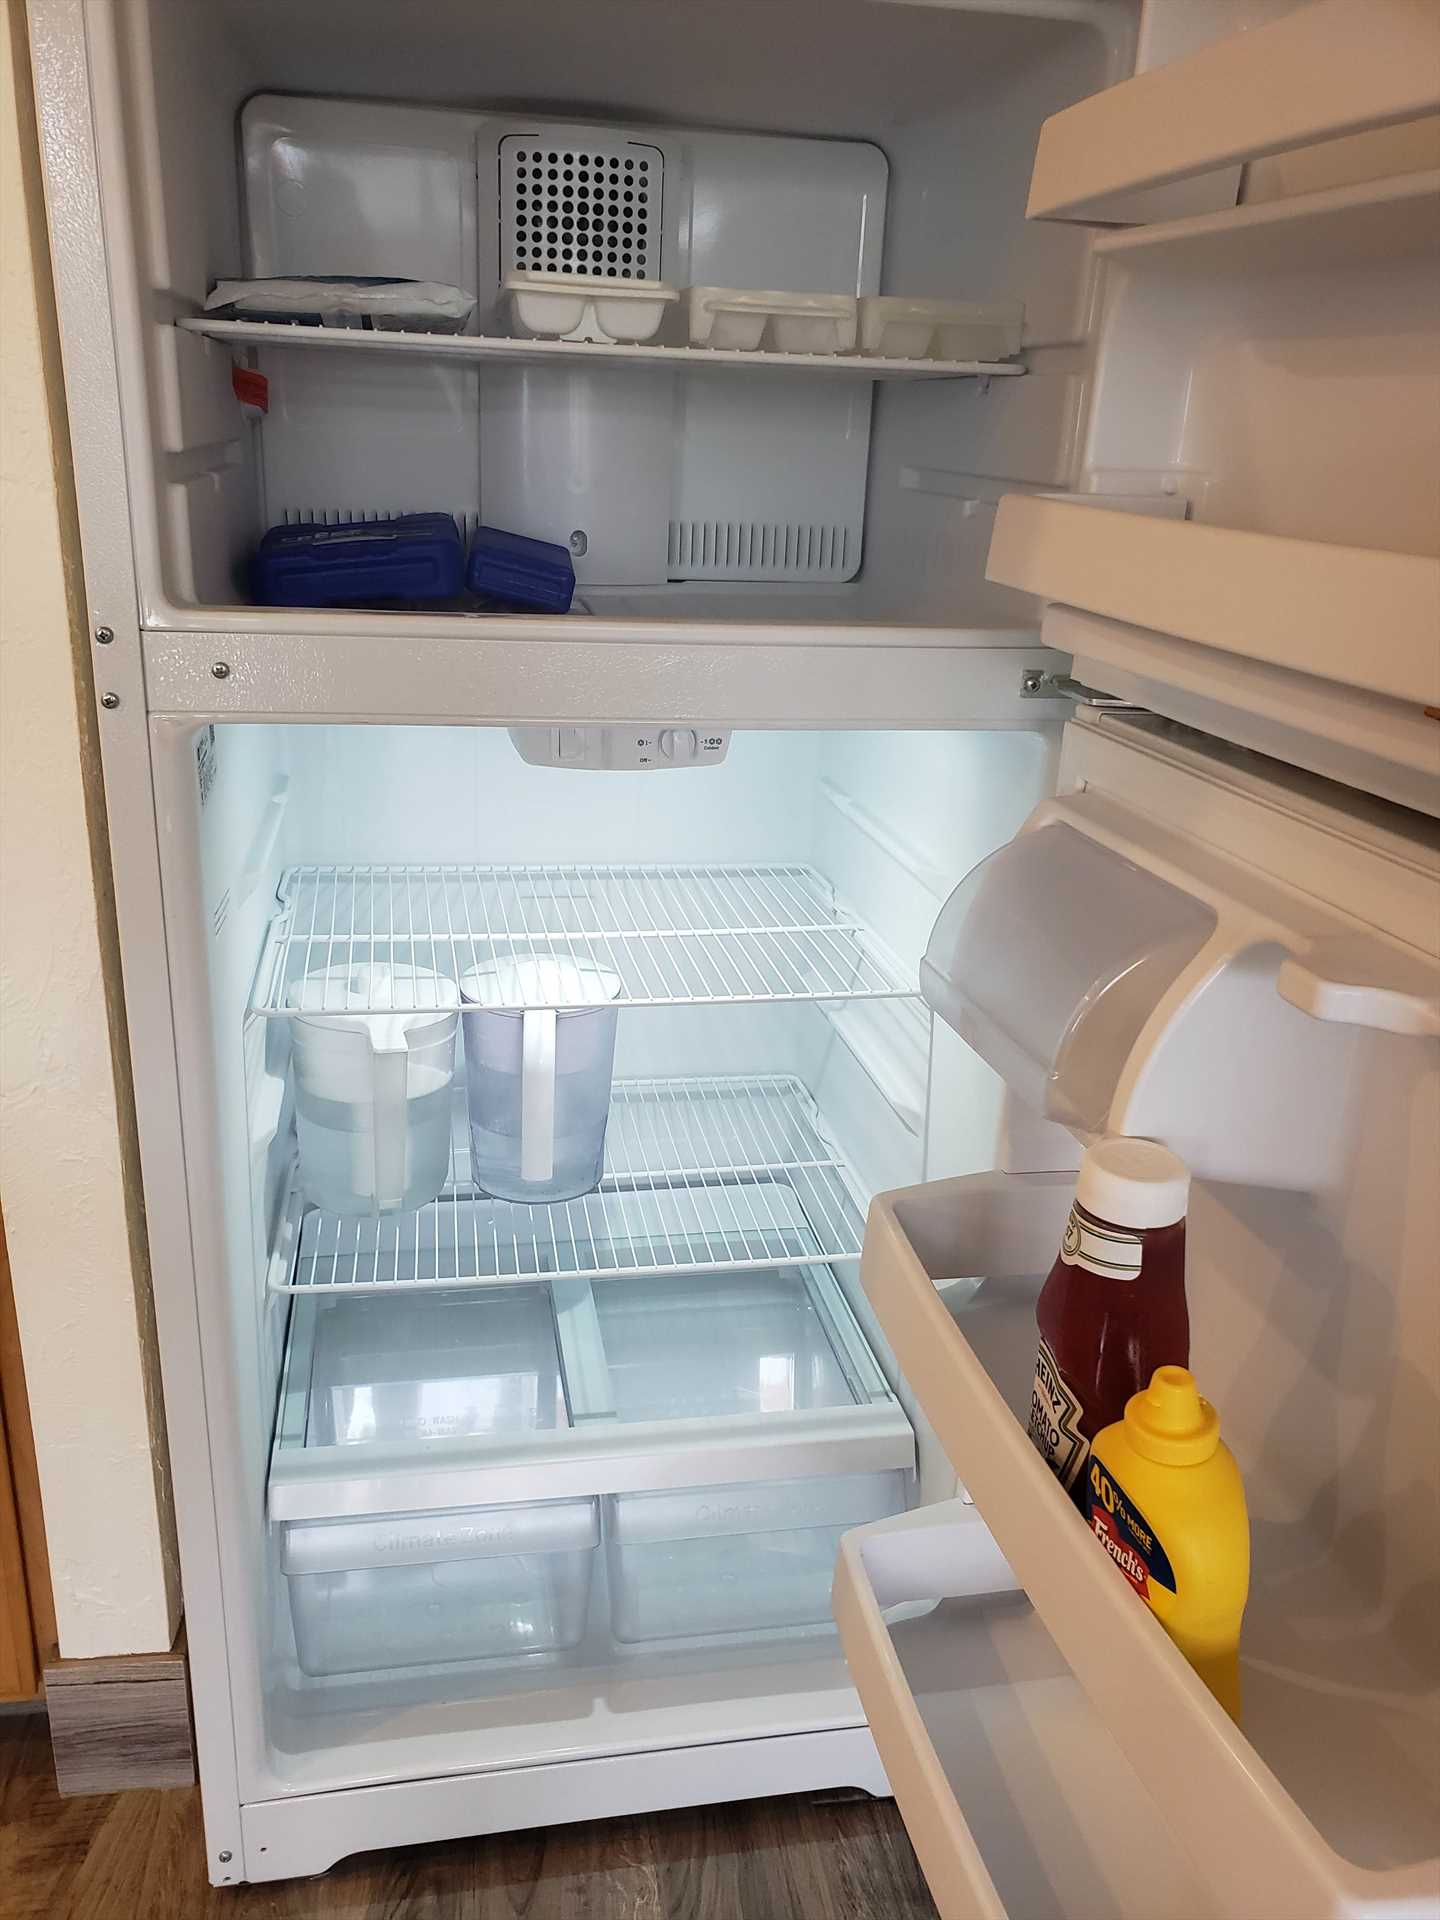 Clean fridge for your groceries